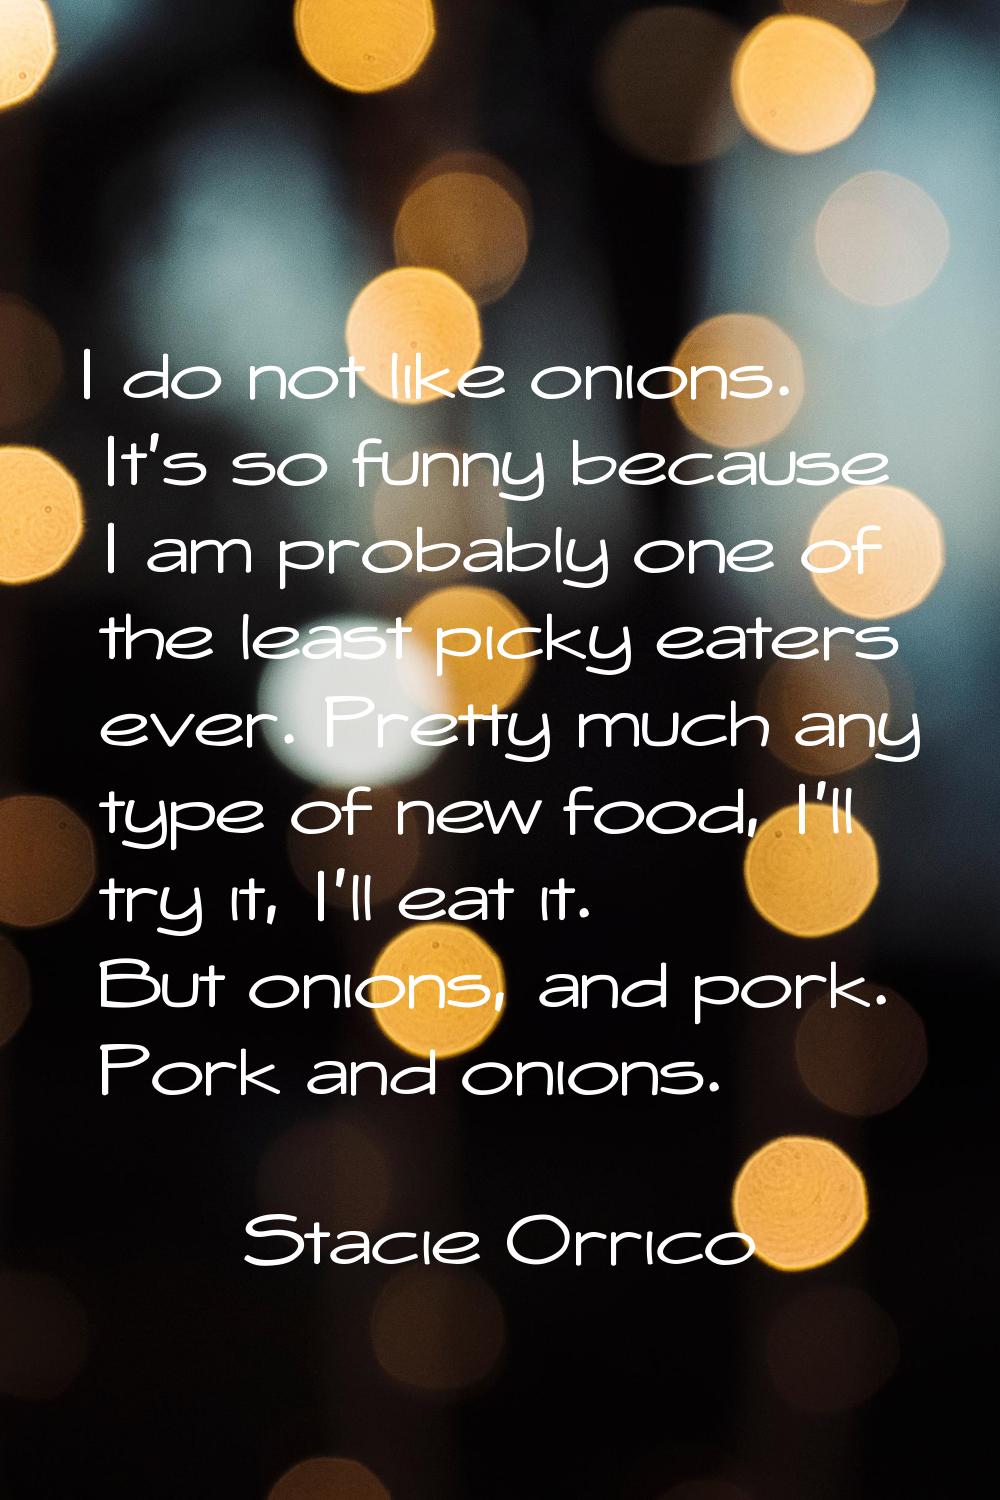 I do not like onions. It's so funny because I am probably one of the least picky eaters ever. Prett